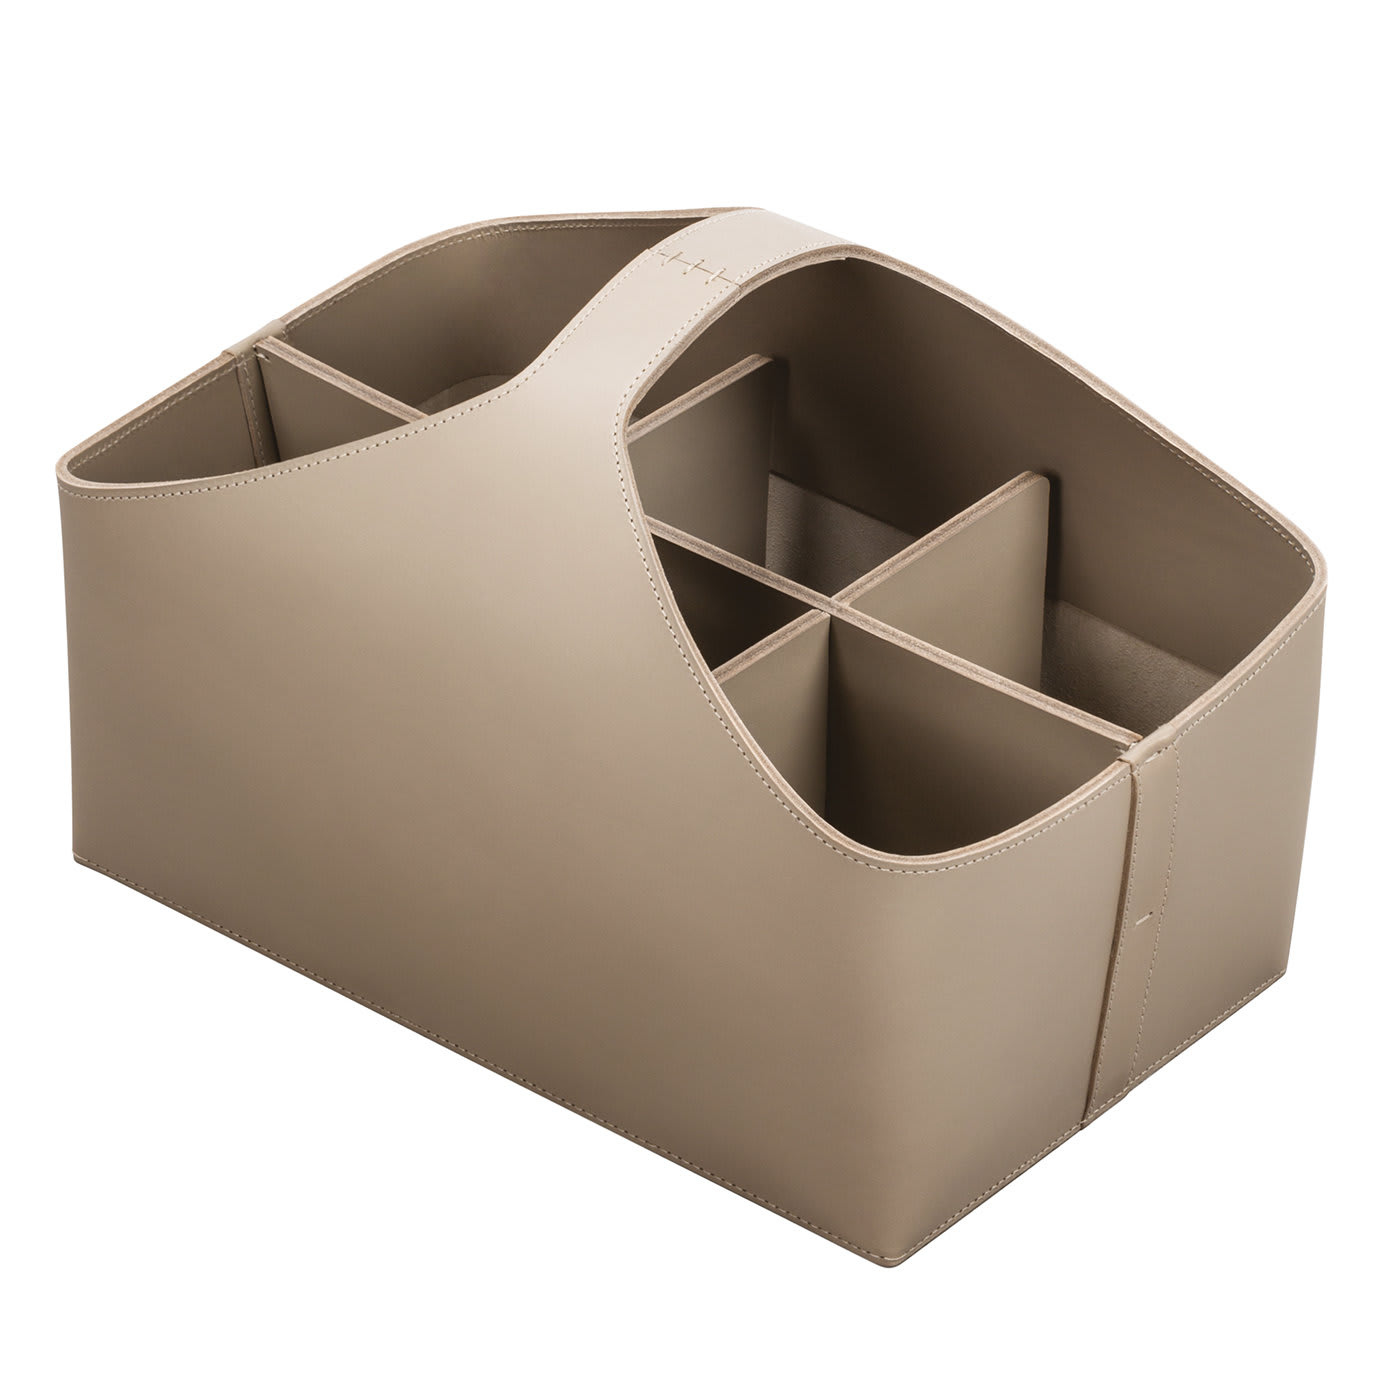 Arco Medium Caddy Basket with 6 Dividers in Sand Leather - Rabitti 1969